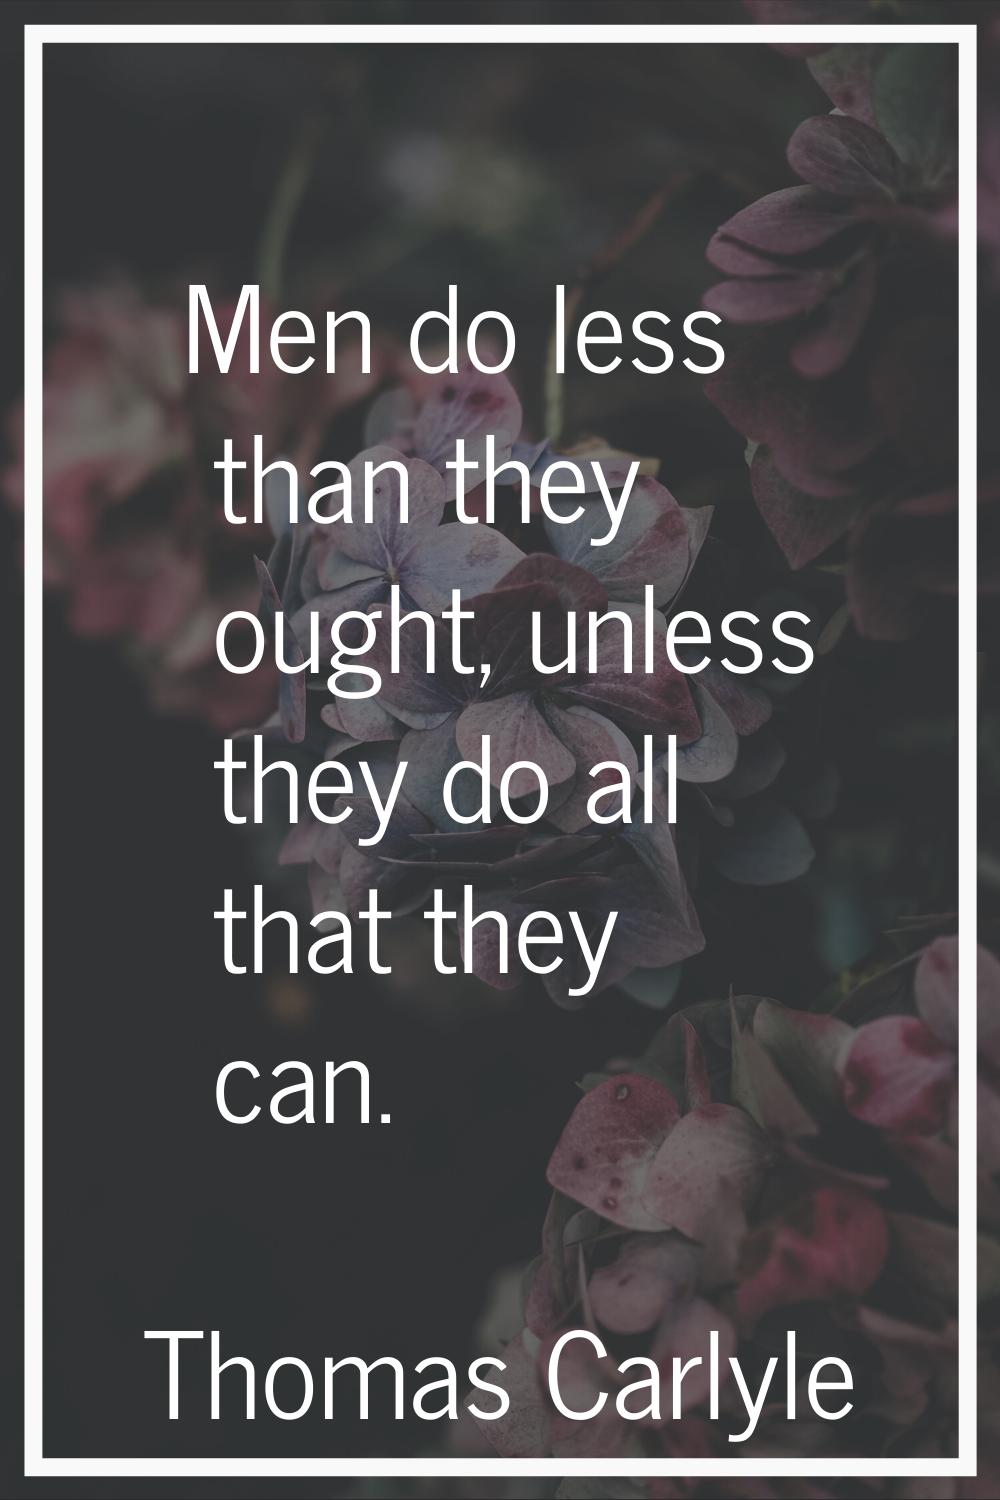 Men do less than they ought, unless they do all that they can.